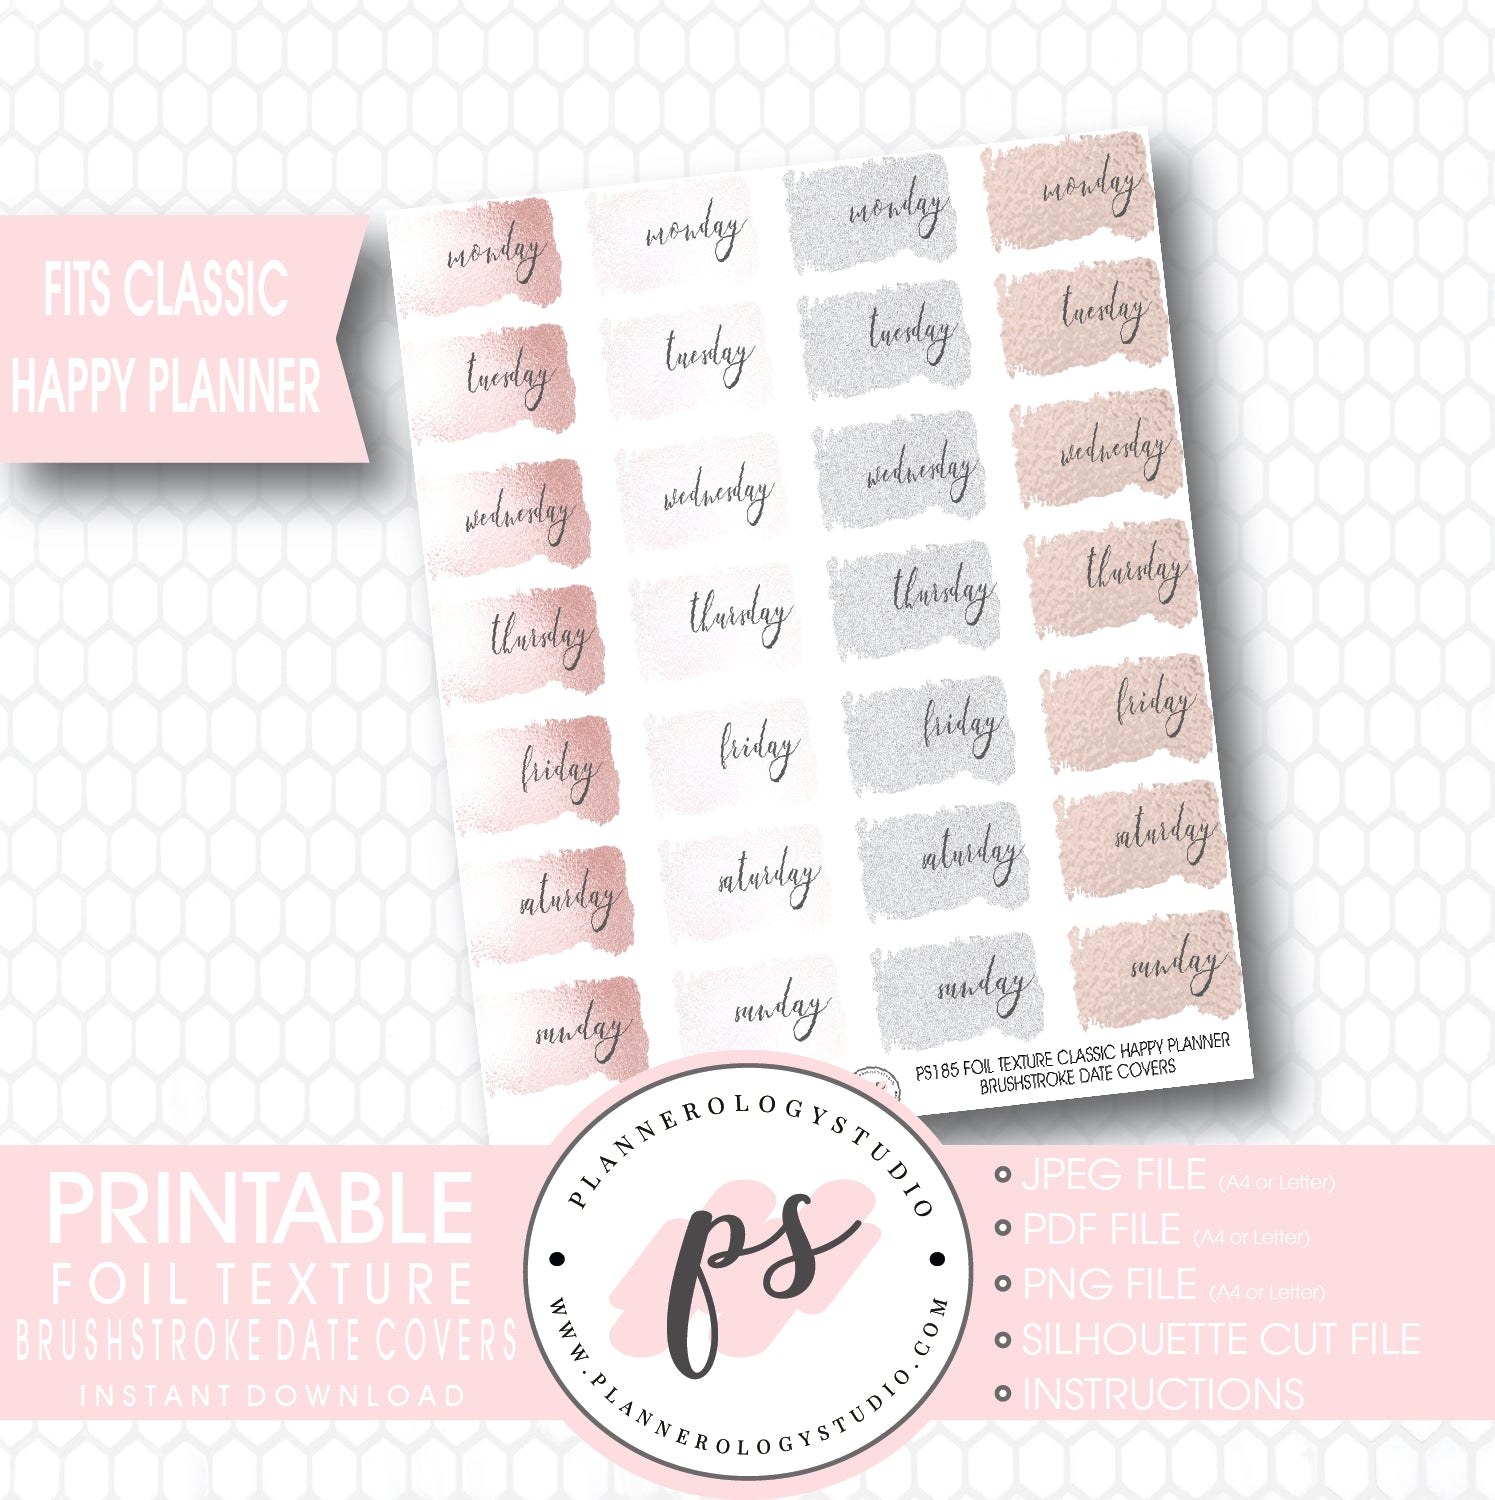 Foil Texture Brushstrokes Date Cover Printable Planner Stickers (for Classic Happy Planner) - Plannerologystudio